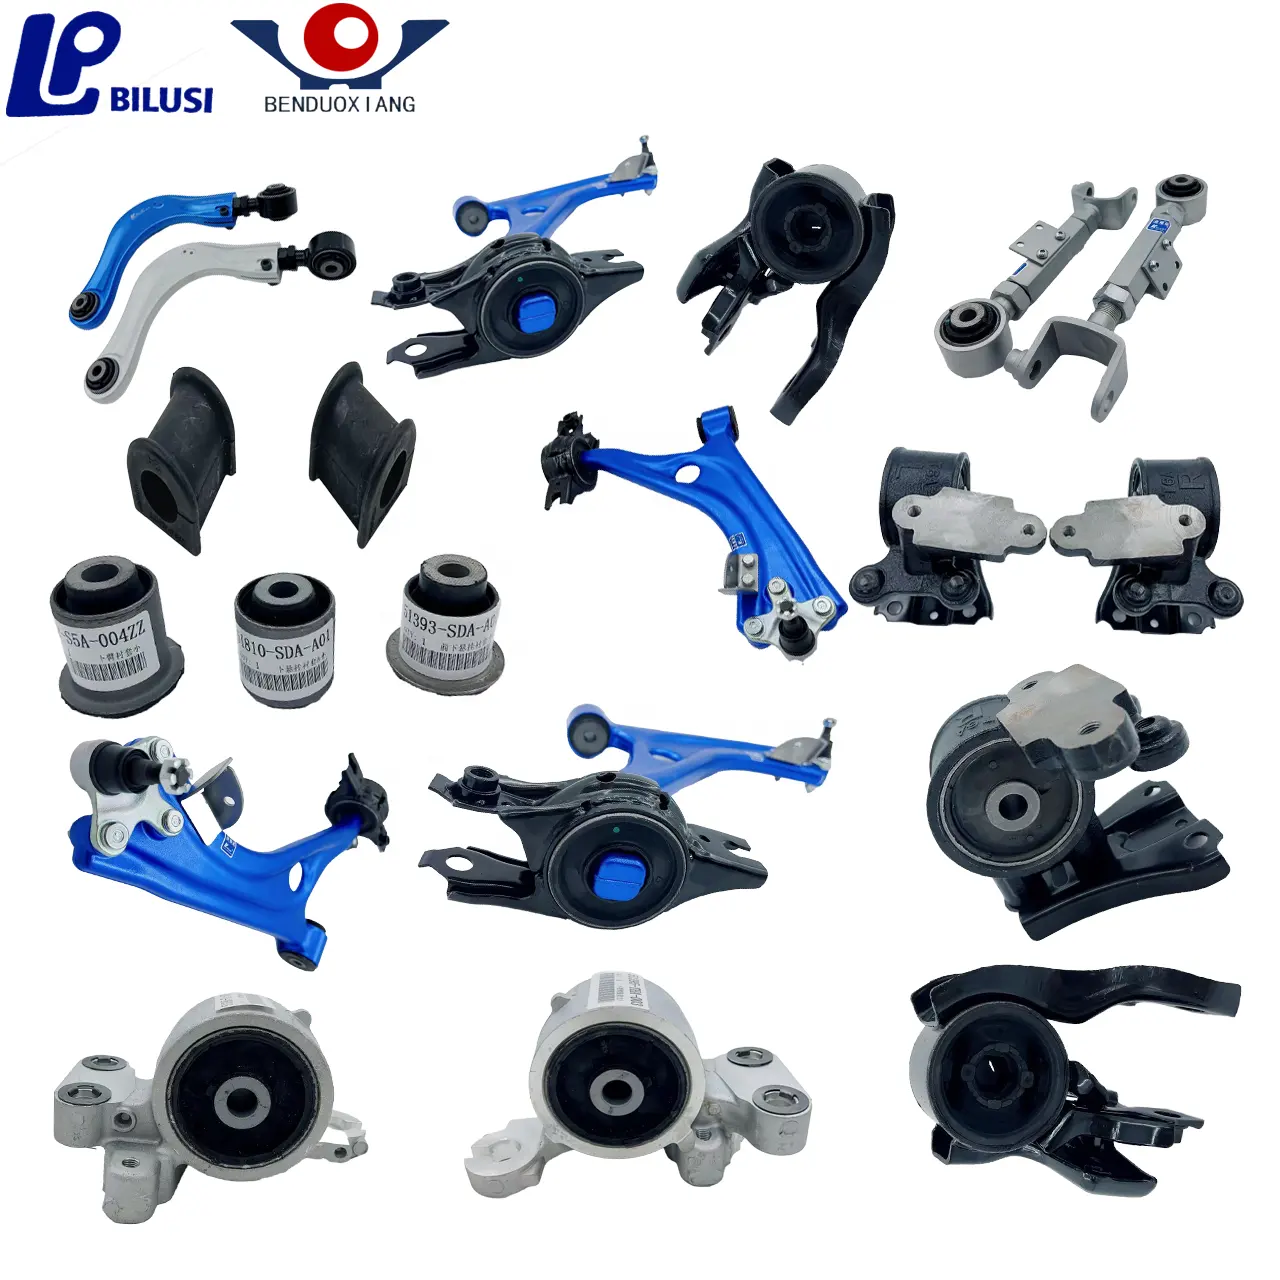 Bilusi factorywholesale highquality forToyota Nissan Hondaauto parts, moreabout auto parts please contact us here, you can get